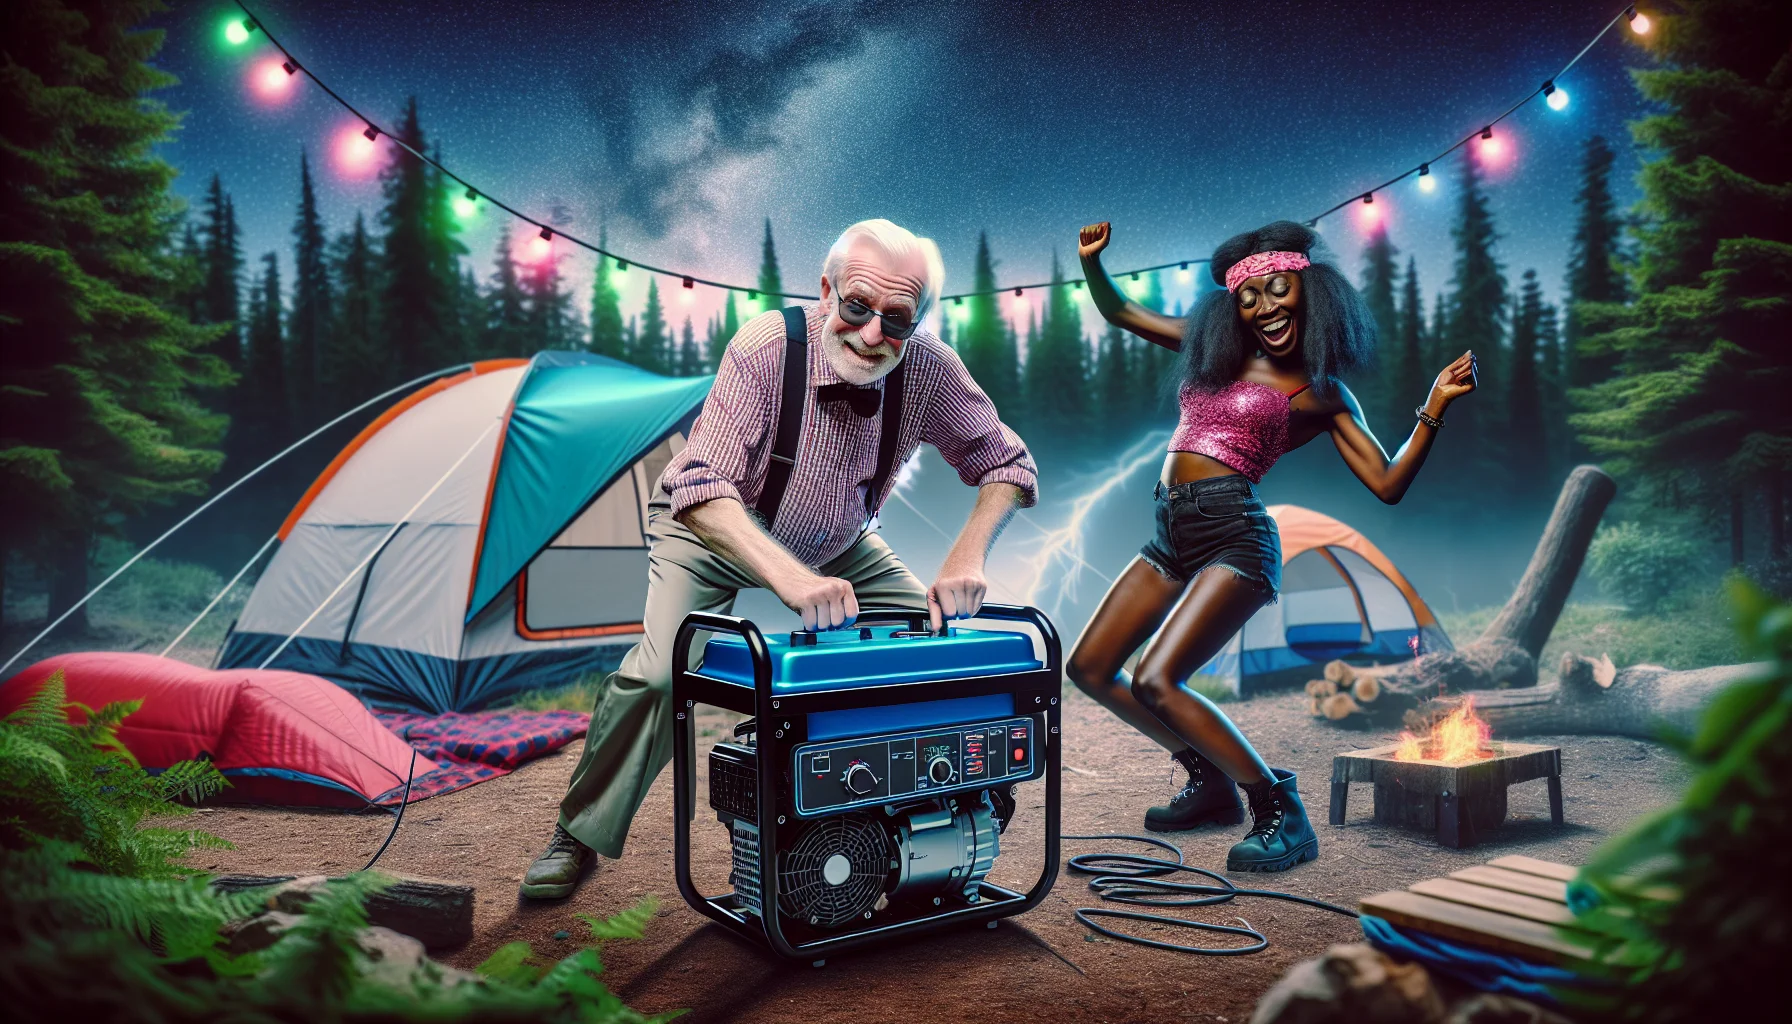 Create a humorous and eye-catching scene depicting a portable generator in an unexpected situation to highlight the joy of generating your own electricity. Envision this: An elderly Caucasian man and a young Black woman are camping in the wilderness. They are unexpectedly having a disco party at the campsite, complete with colorful lights and a dance floor. The electricity they're using is amusingly sourced by a sturdy, robust portable generator, instead of the traditional grid supply. They're dancing and enjoying themselves under the starry night, showcasing the freedom that comes with a personal electricity source.